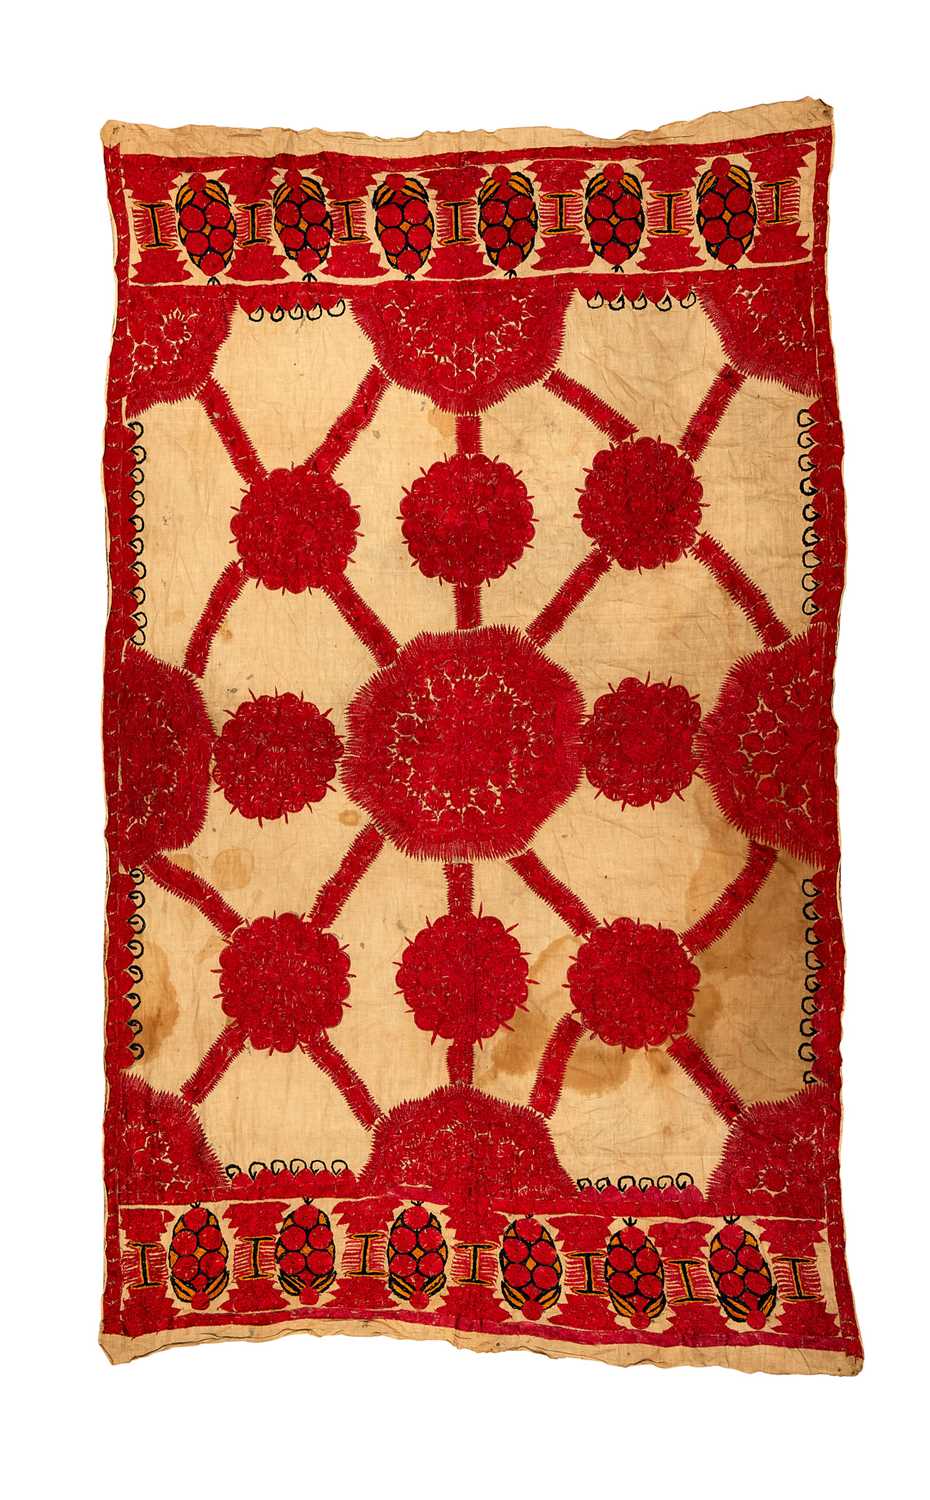 AN EARLY 19TH CENTURY INDIAN EMBROIDERED BED COVERLET